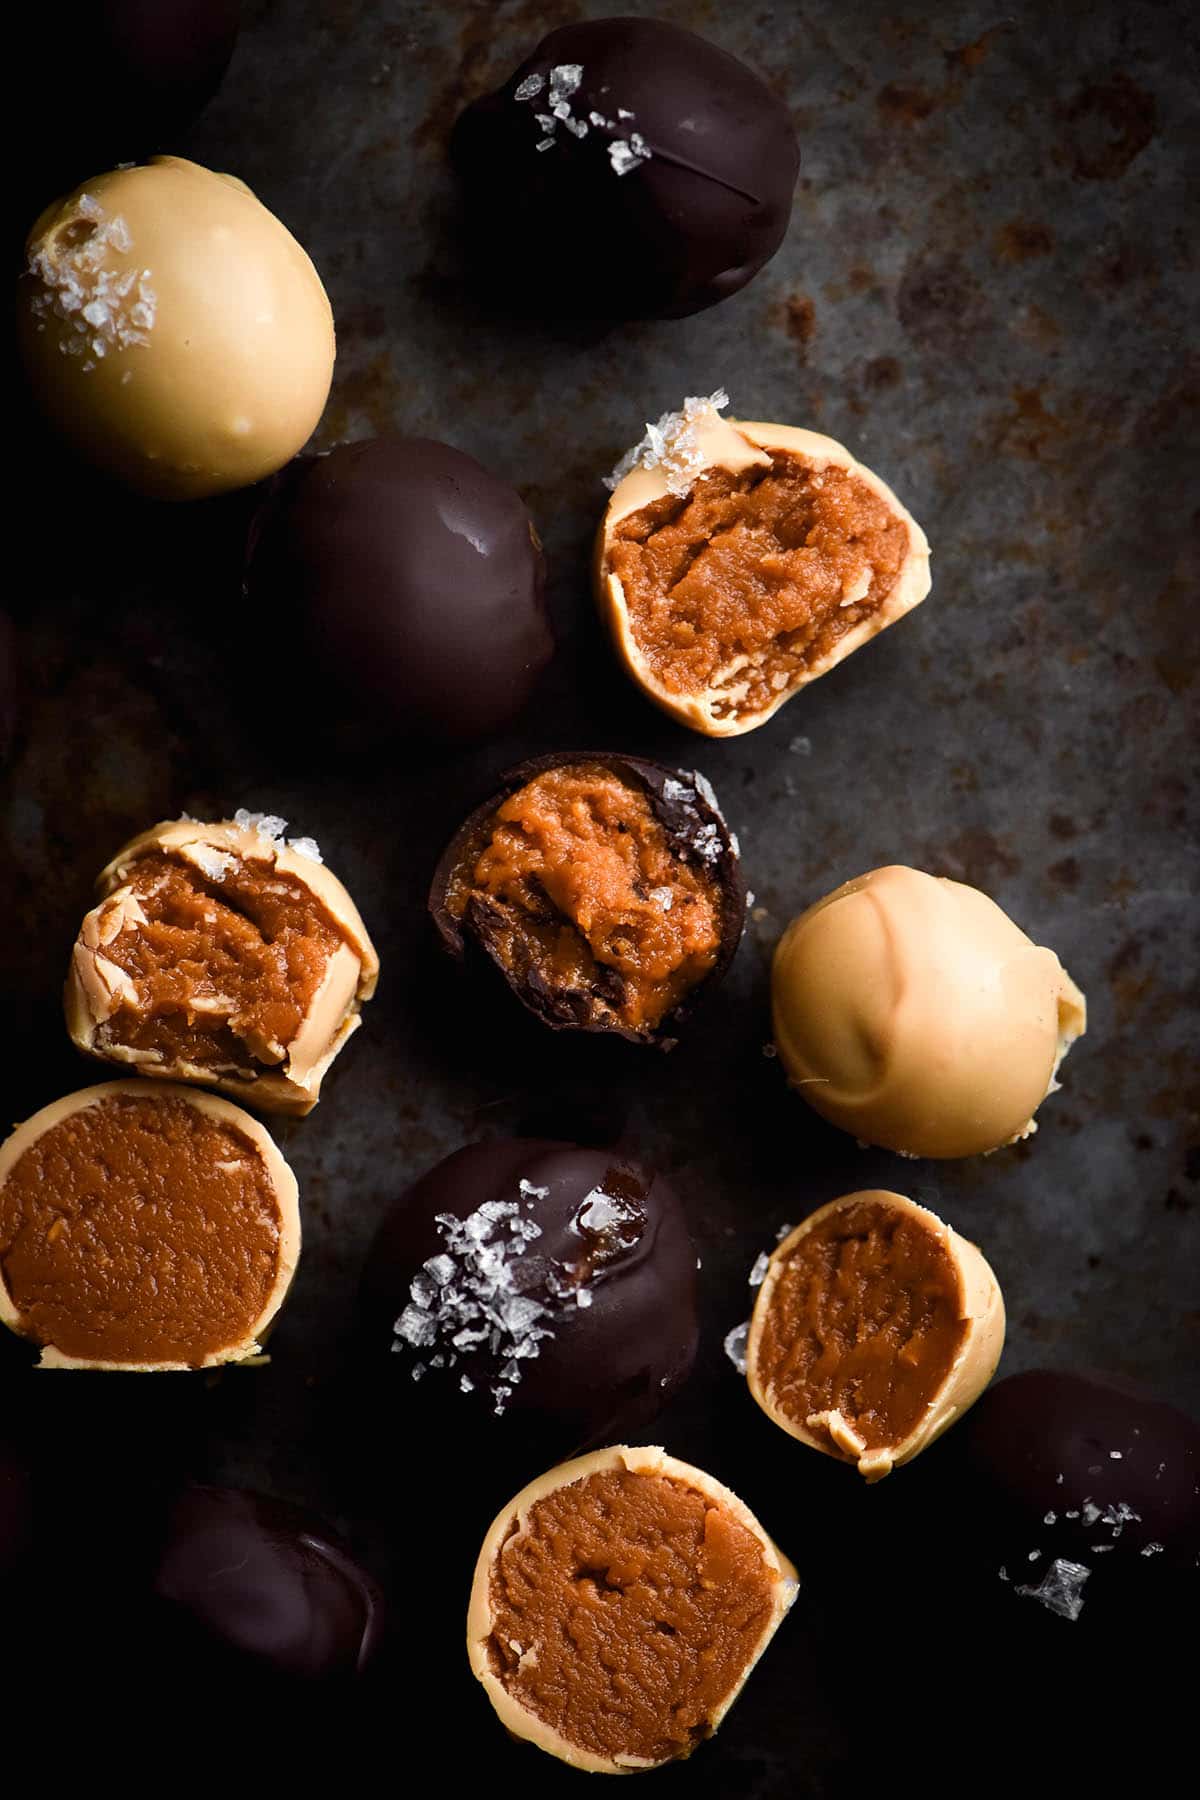 An aerial view of dark and white chocolate coated peanut truffes, some bitten into and some topped with a sprinkling of sea salt flakes. The truffles sit atop a mottled grey backdrop